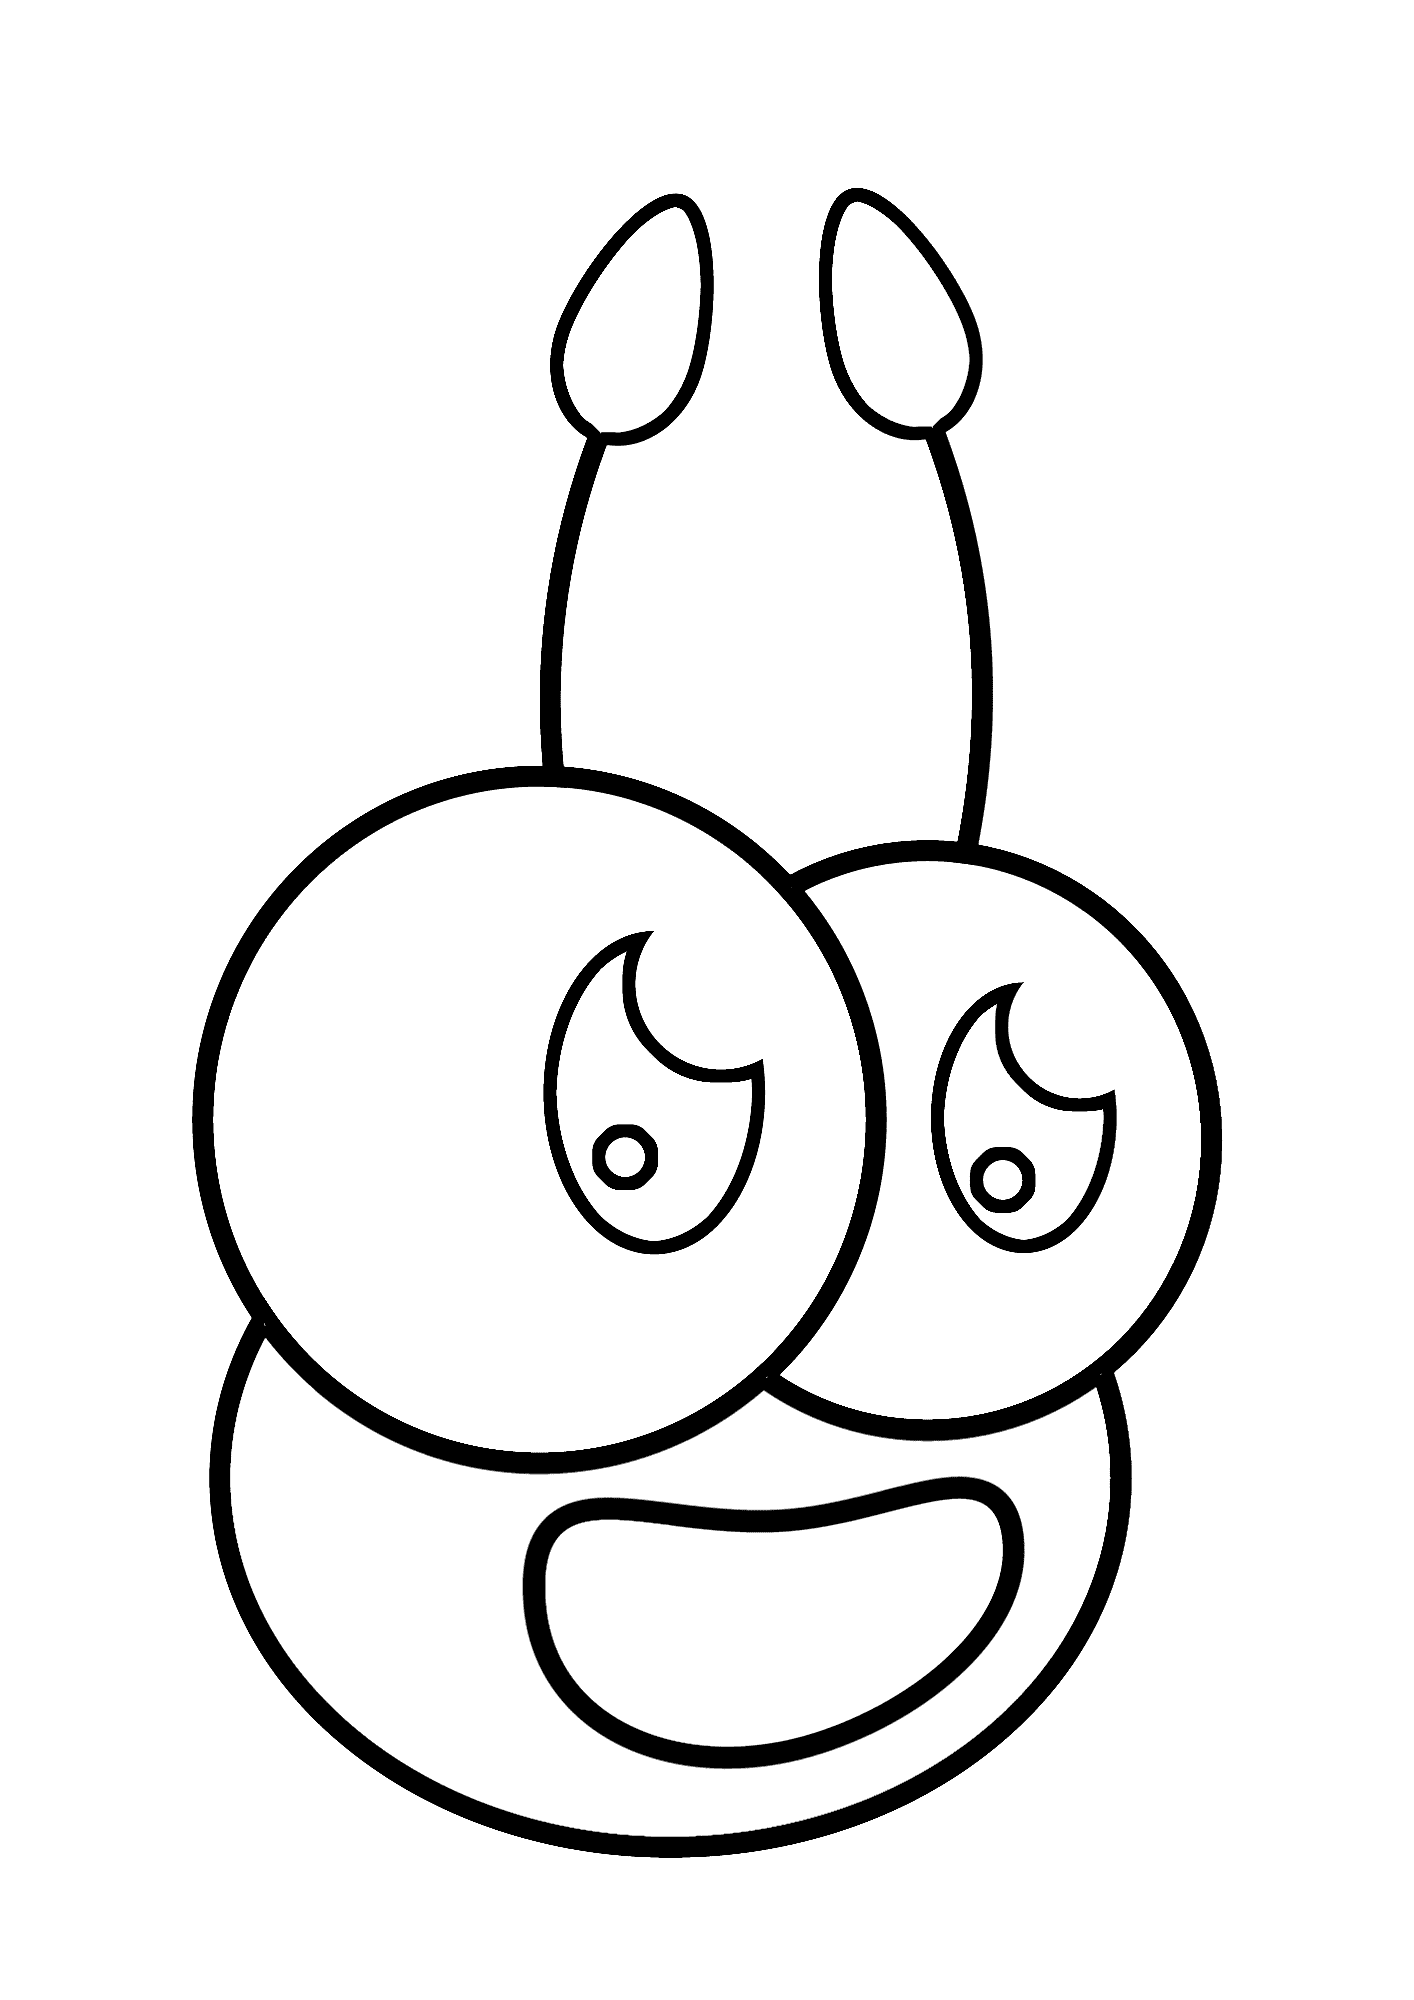 Ant Face Coloring Page